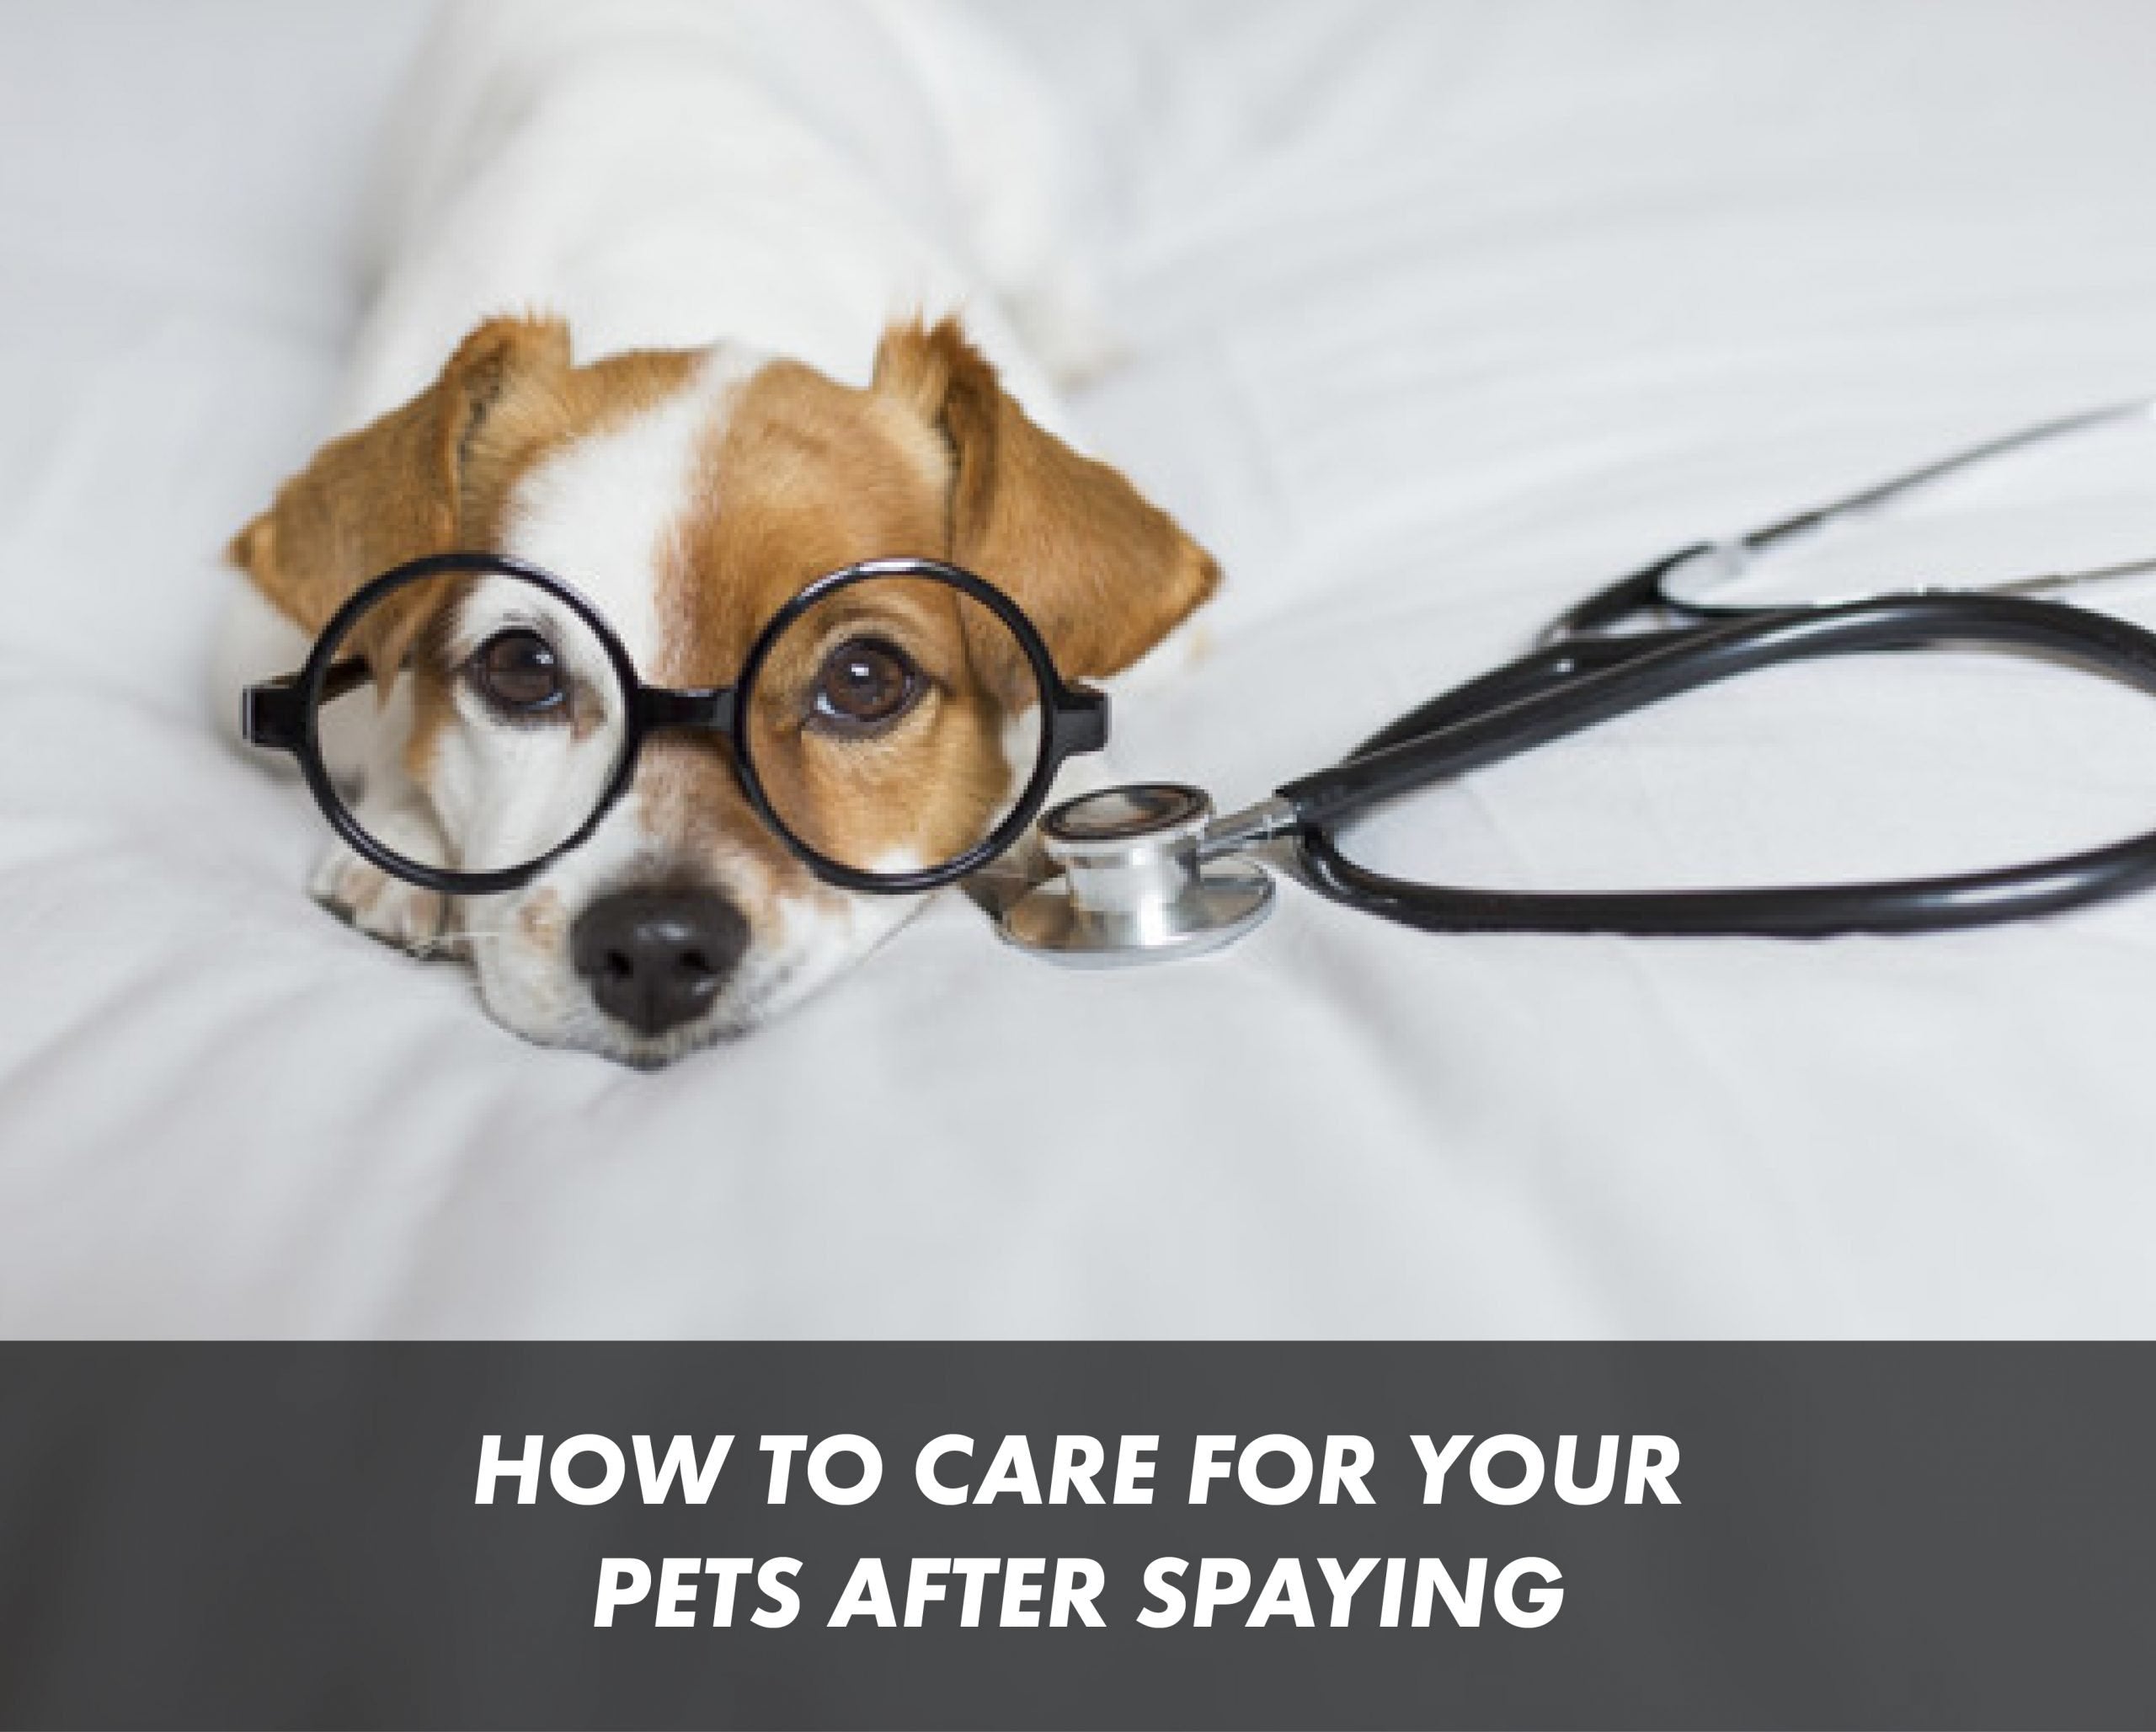 How to Care for Your Pets After Spaying